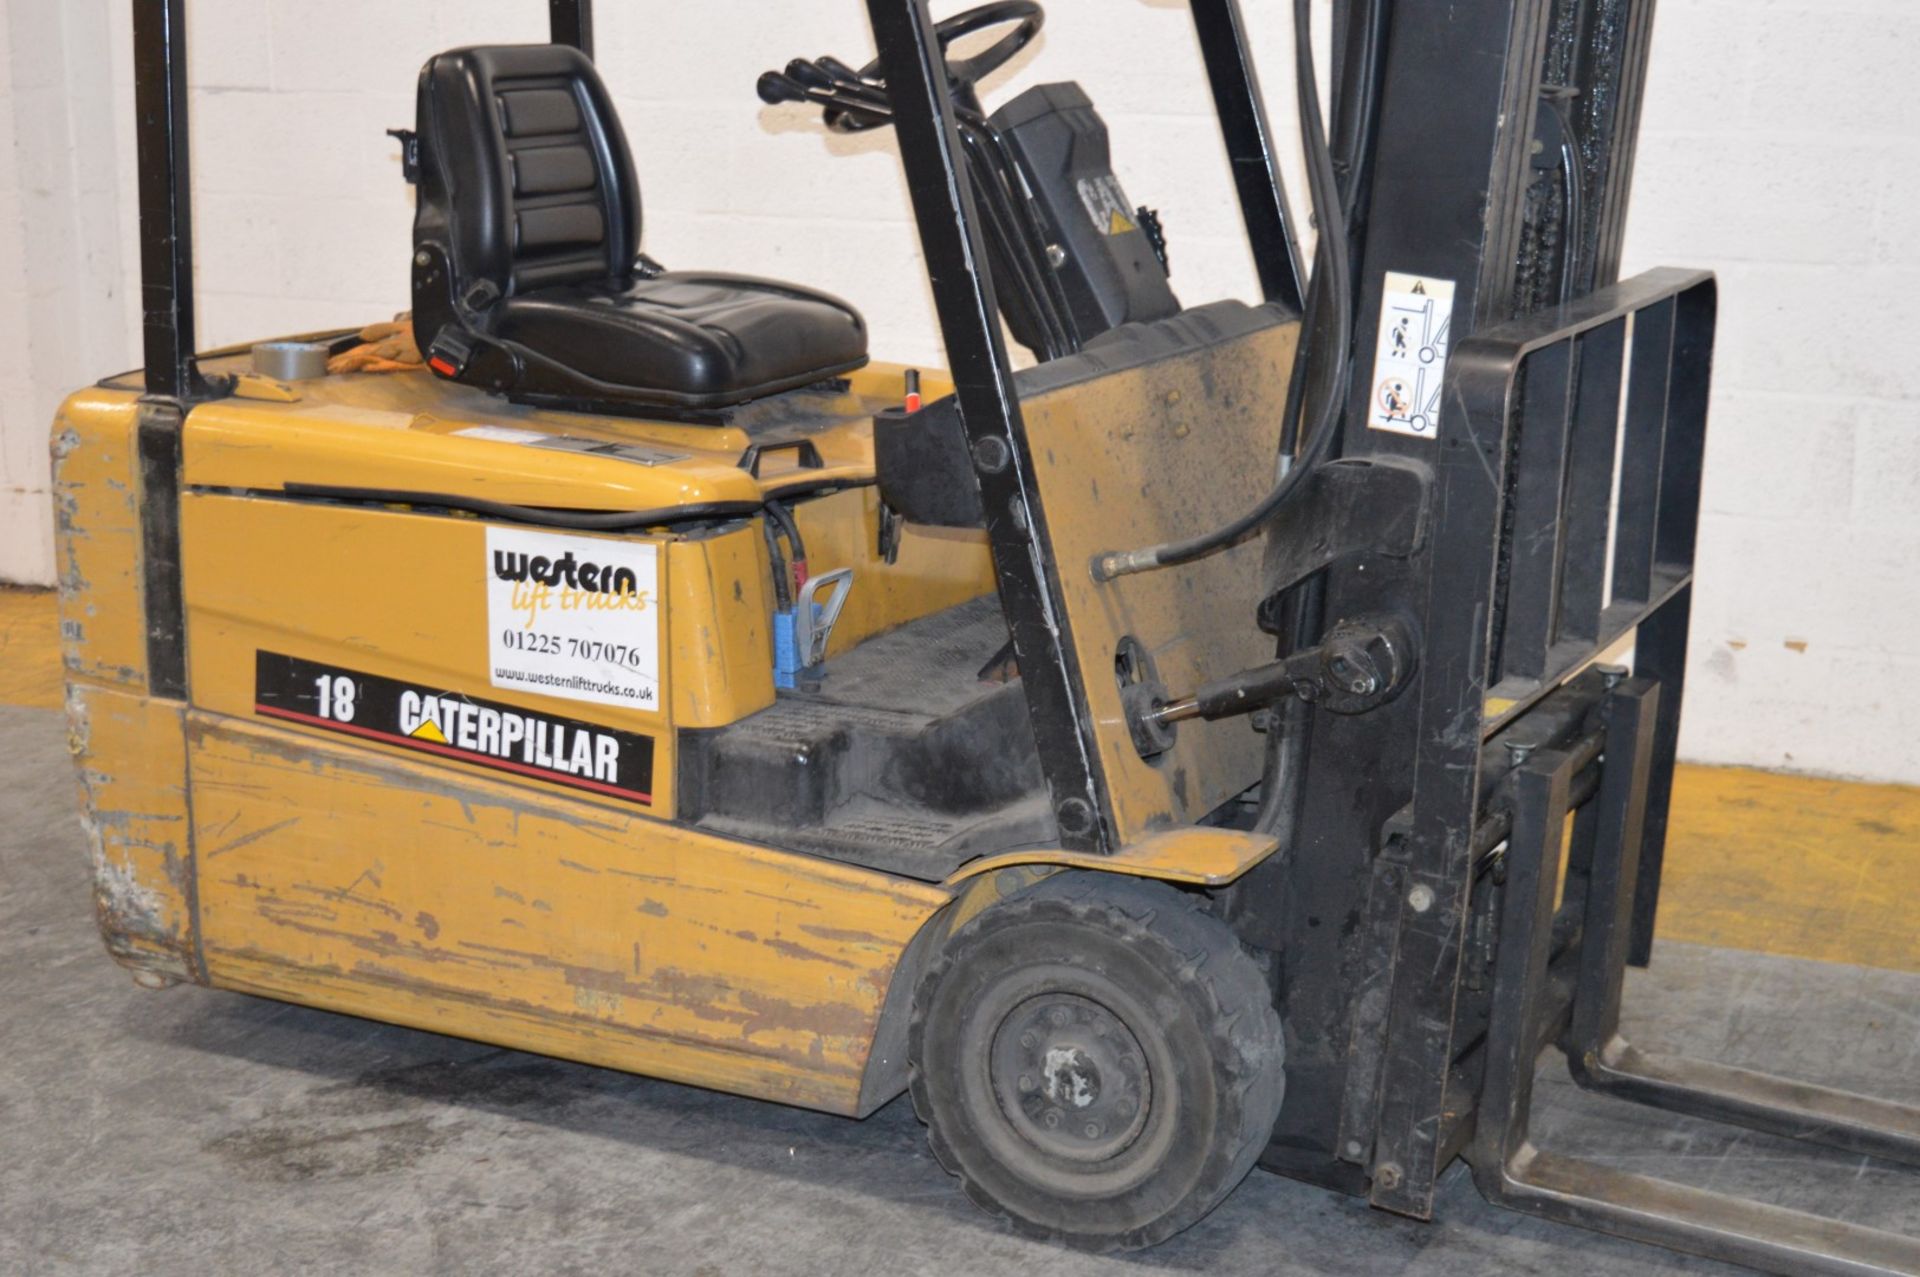 1 x Caterpillar Electric Counter Balance Forklift Truck - Model EP18KT - 1800kg Basic Capacity - - Image 9 of 14